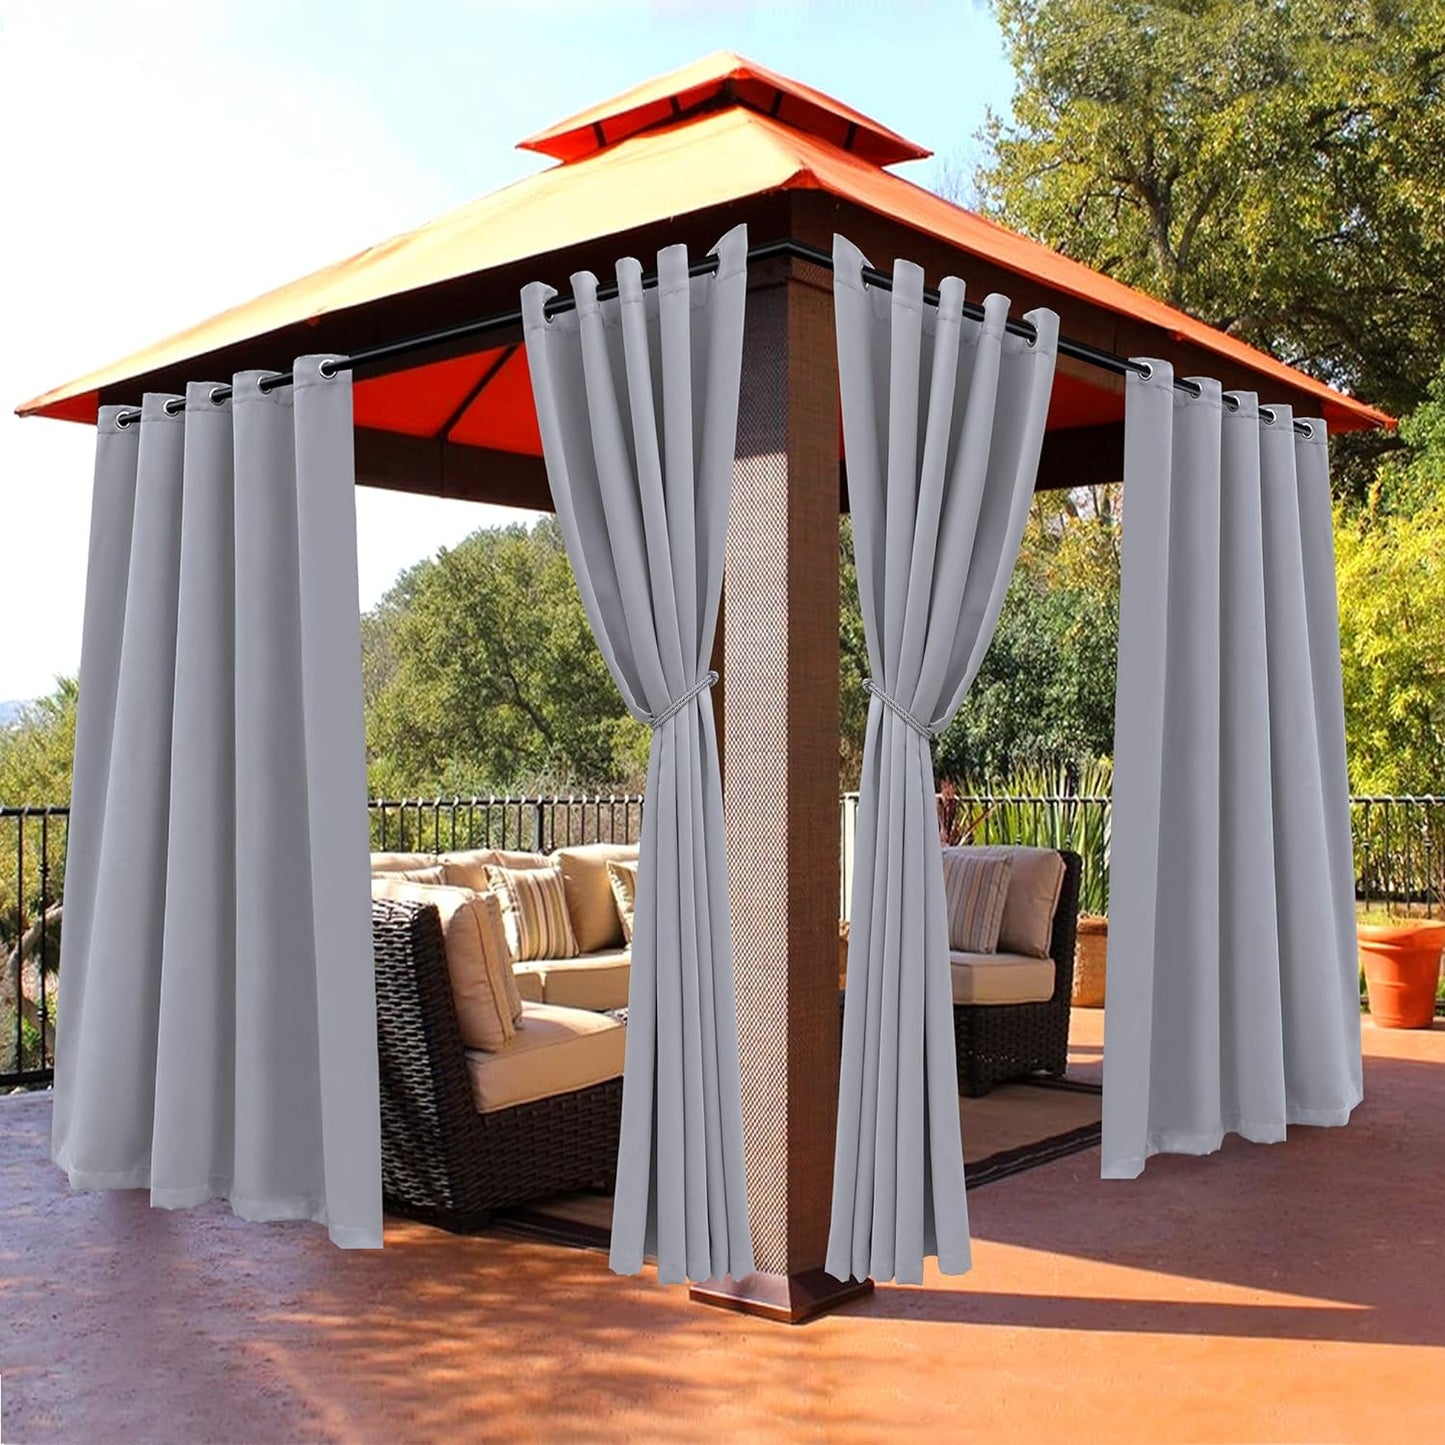 BONZER Outdoor Curtains for Patio Waterproof - Light Blocking Weather Resistant Privacy Grommet Blackout Curtains for Gazebo, Porch, Pergola, Cabana, Deck, Sunroom, 1 Panel, 52W X 84L Inch, Silver  BONZER Silver 70W X 120 Inch 